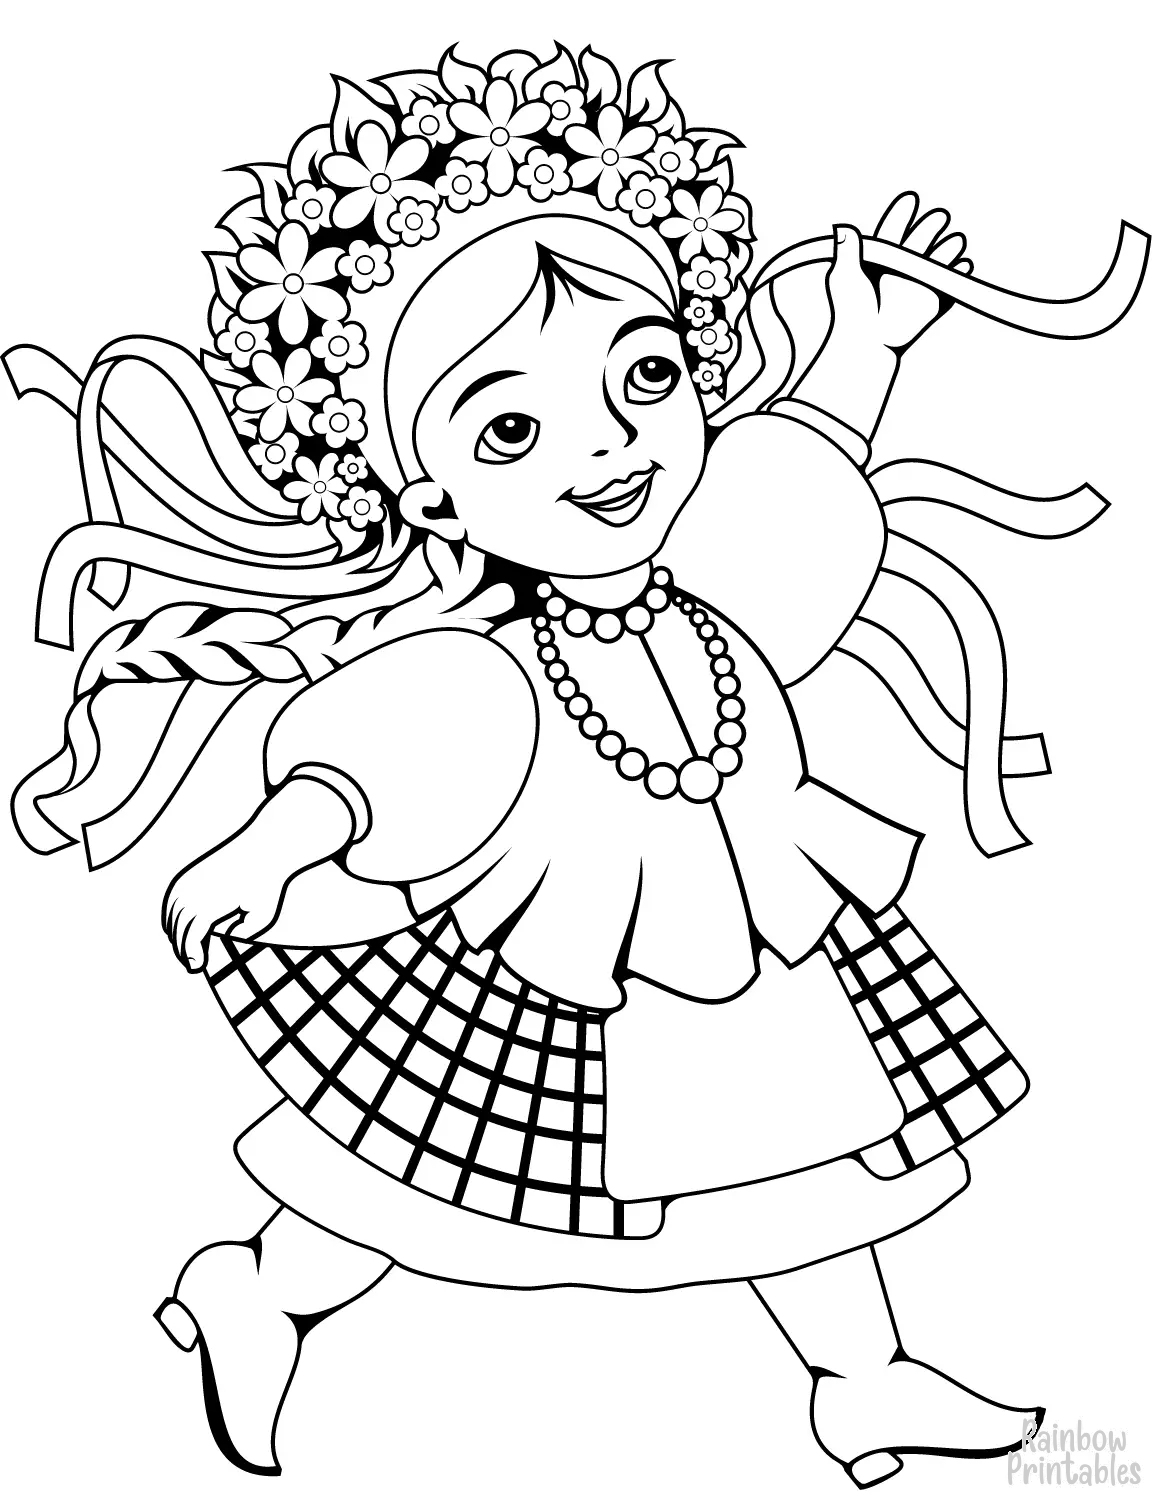 UKRAINIAN Flower GIRL DOLL Clipart Coloring Pages for Kids Adults Art Activities Line Art